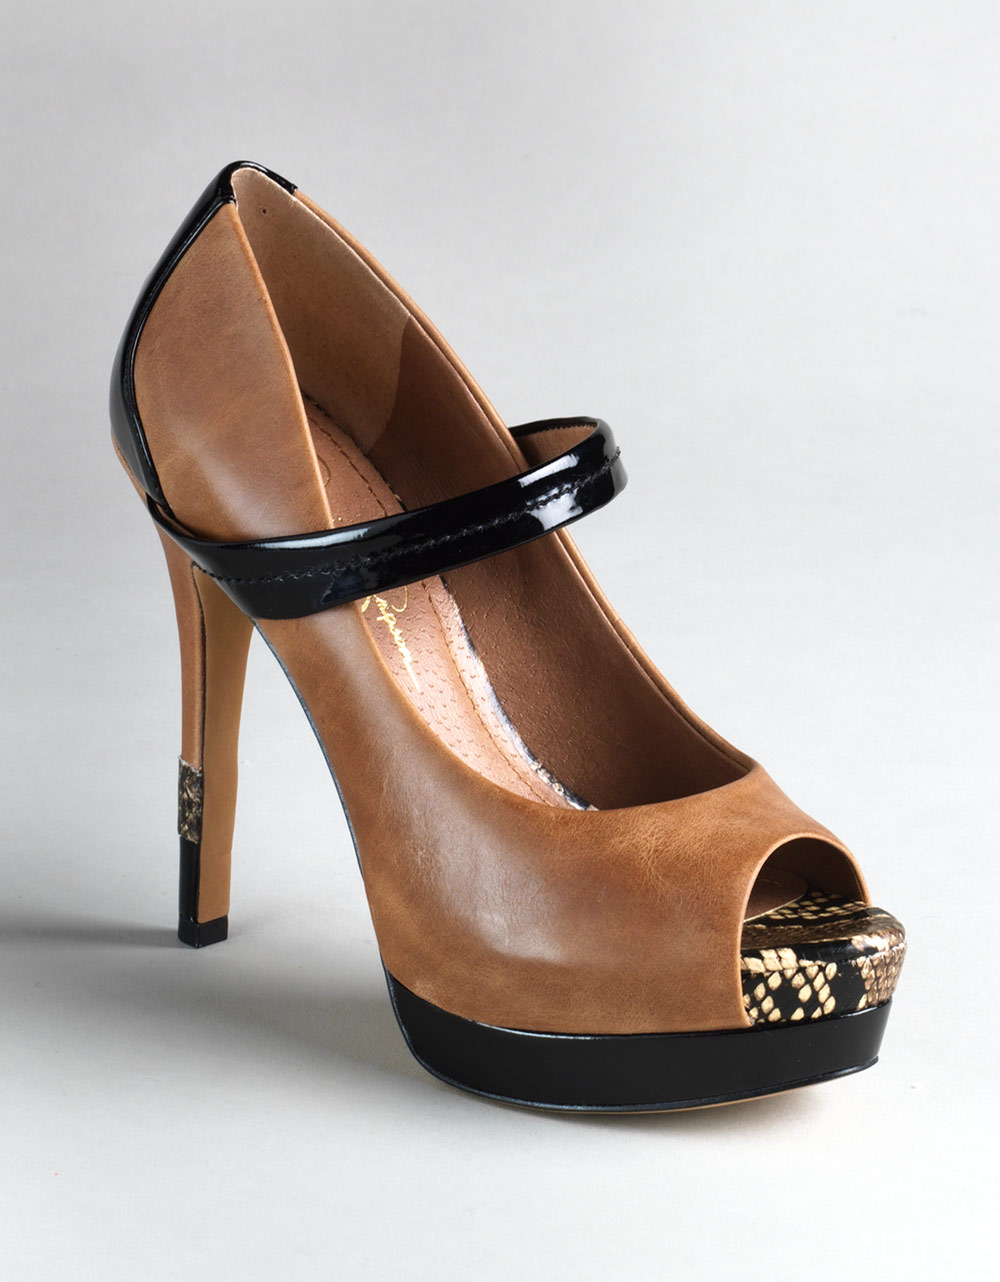 Jessica Simpson Ely Leather Stiletto Pumps in Brown - Lyst